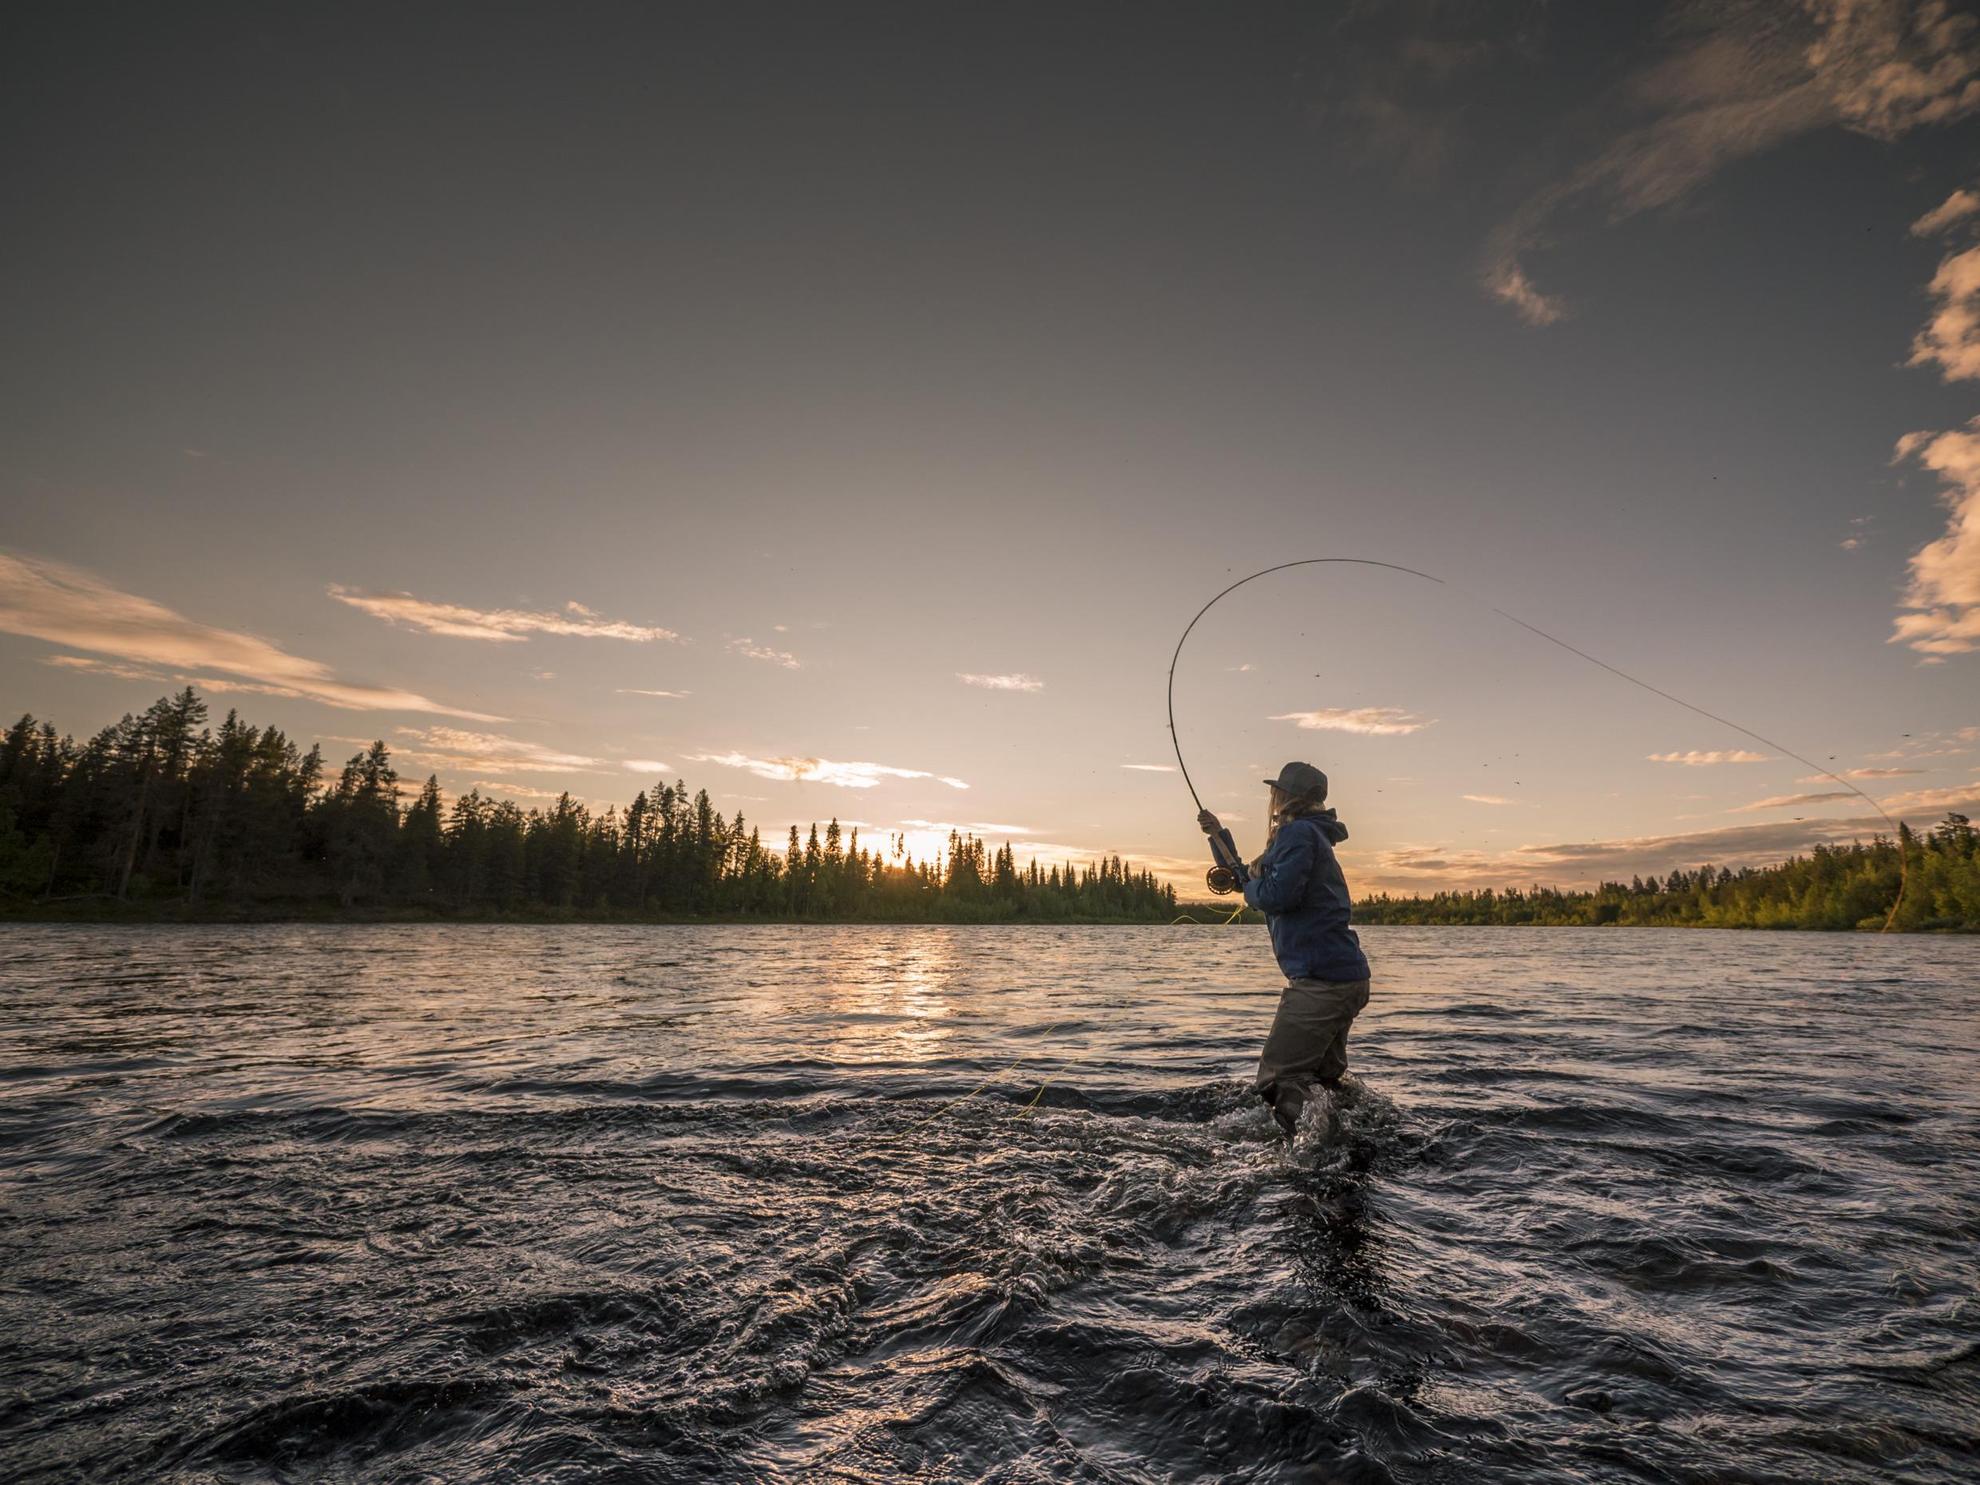 A person is fly-fishing, standing in a river in northern Sweden as the sun is setting.